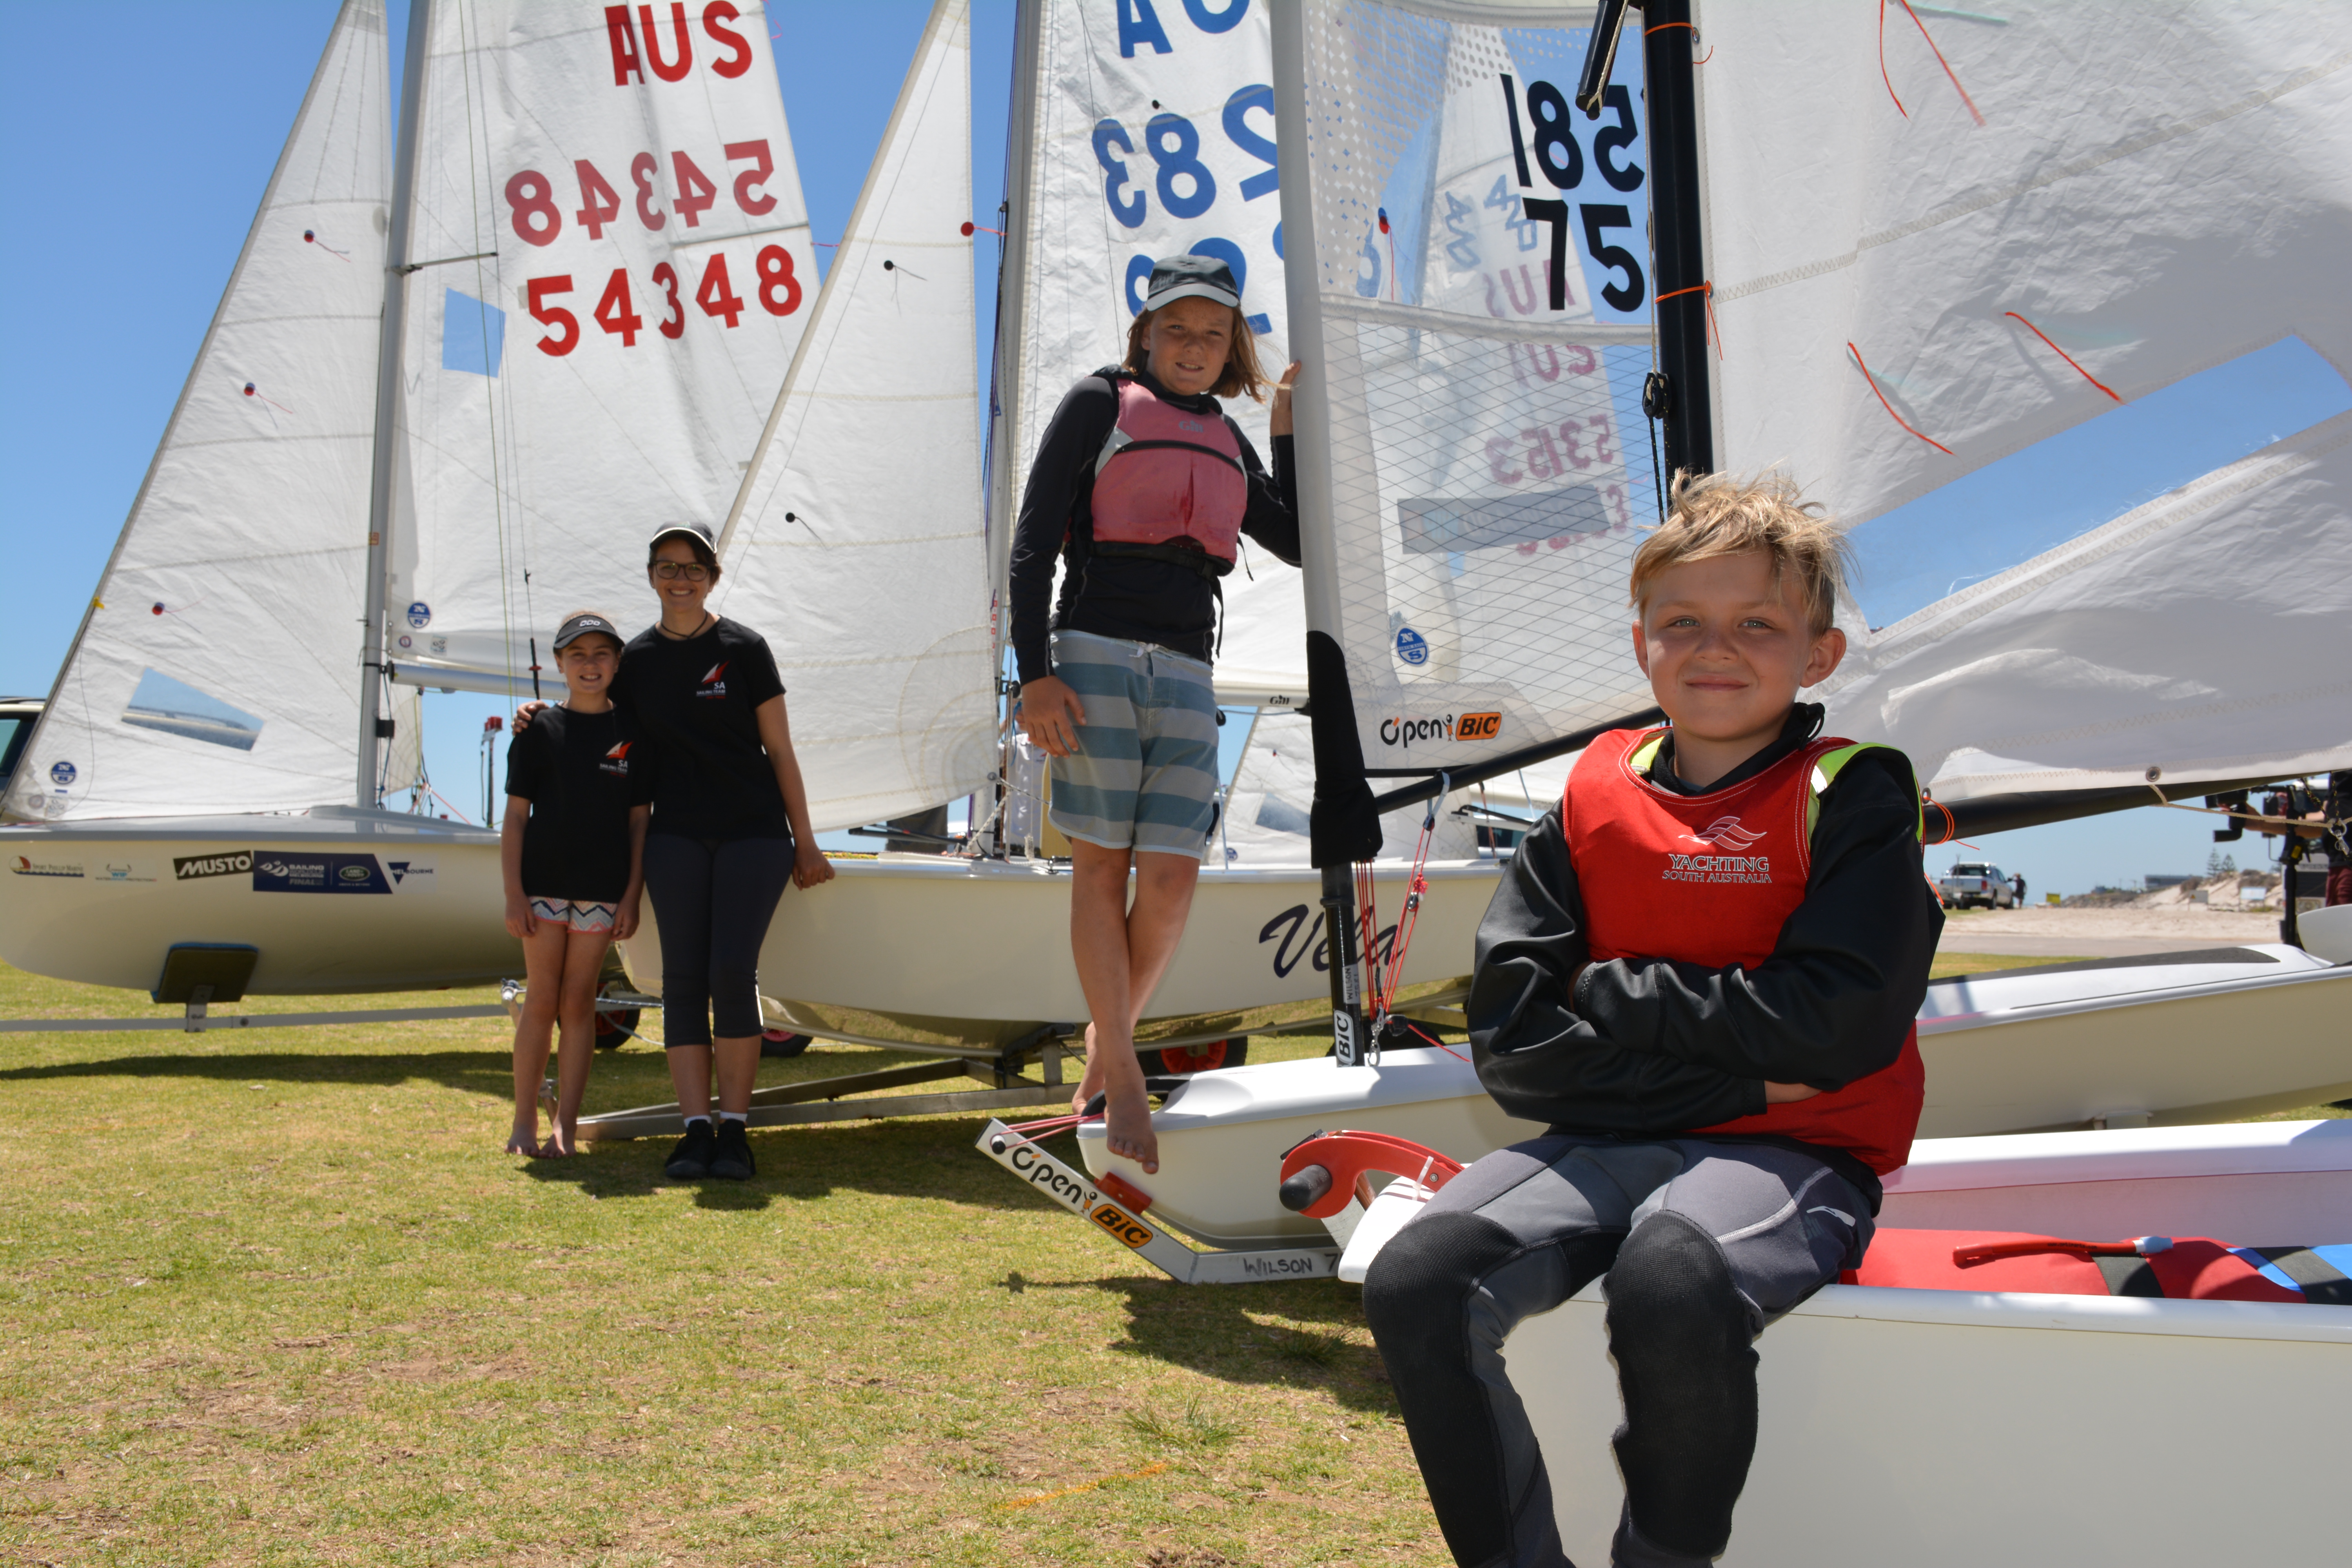 South Australia’s biggest summer of sailing ever